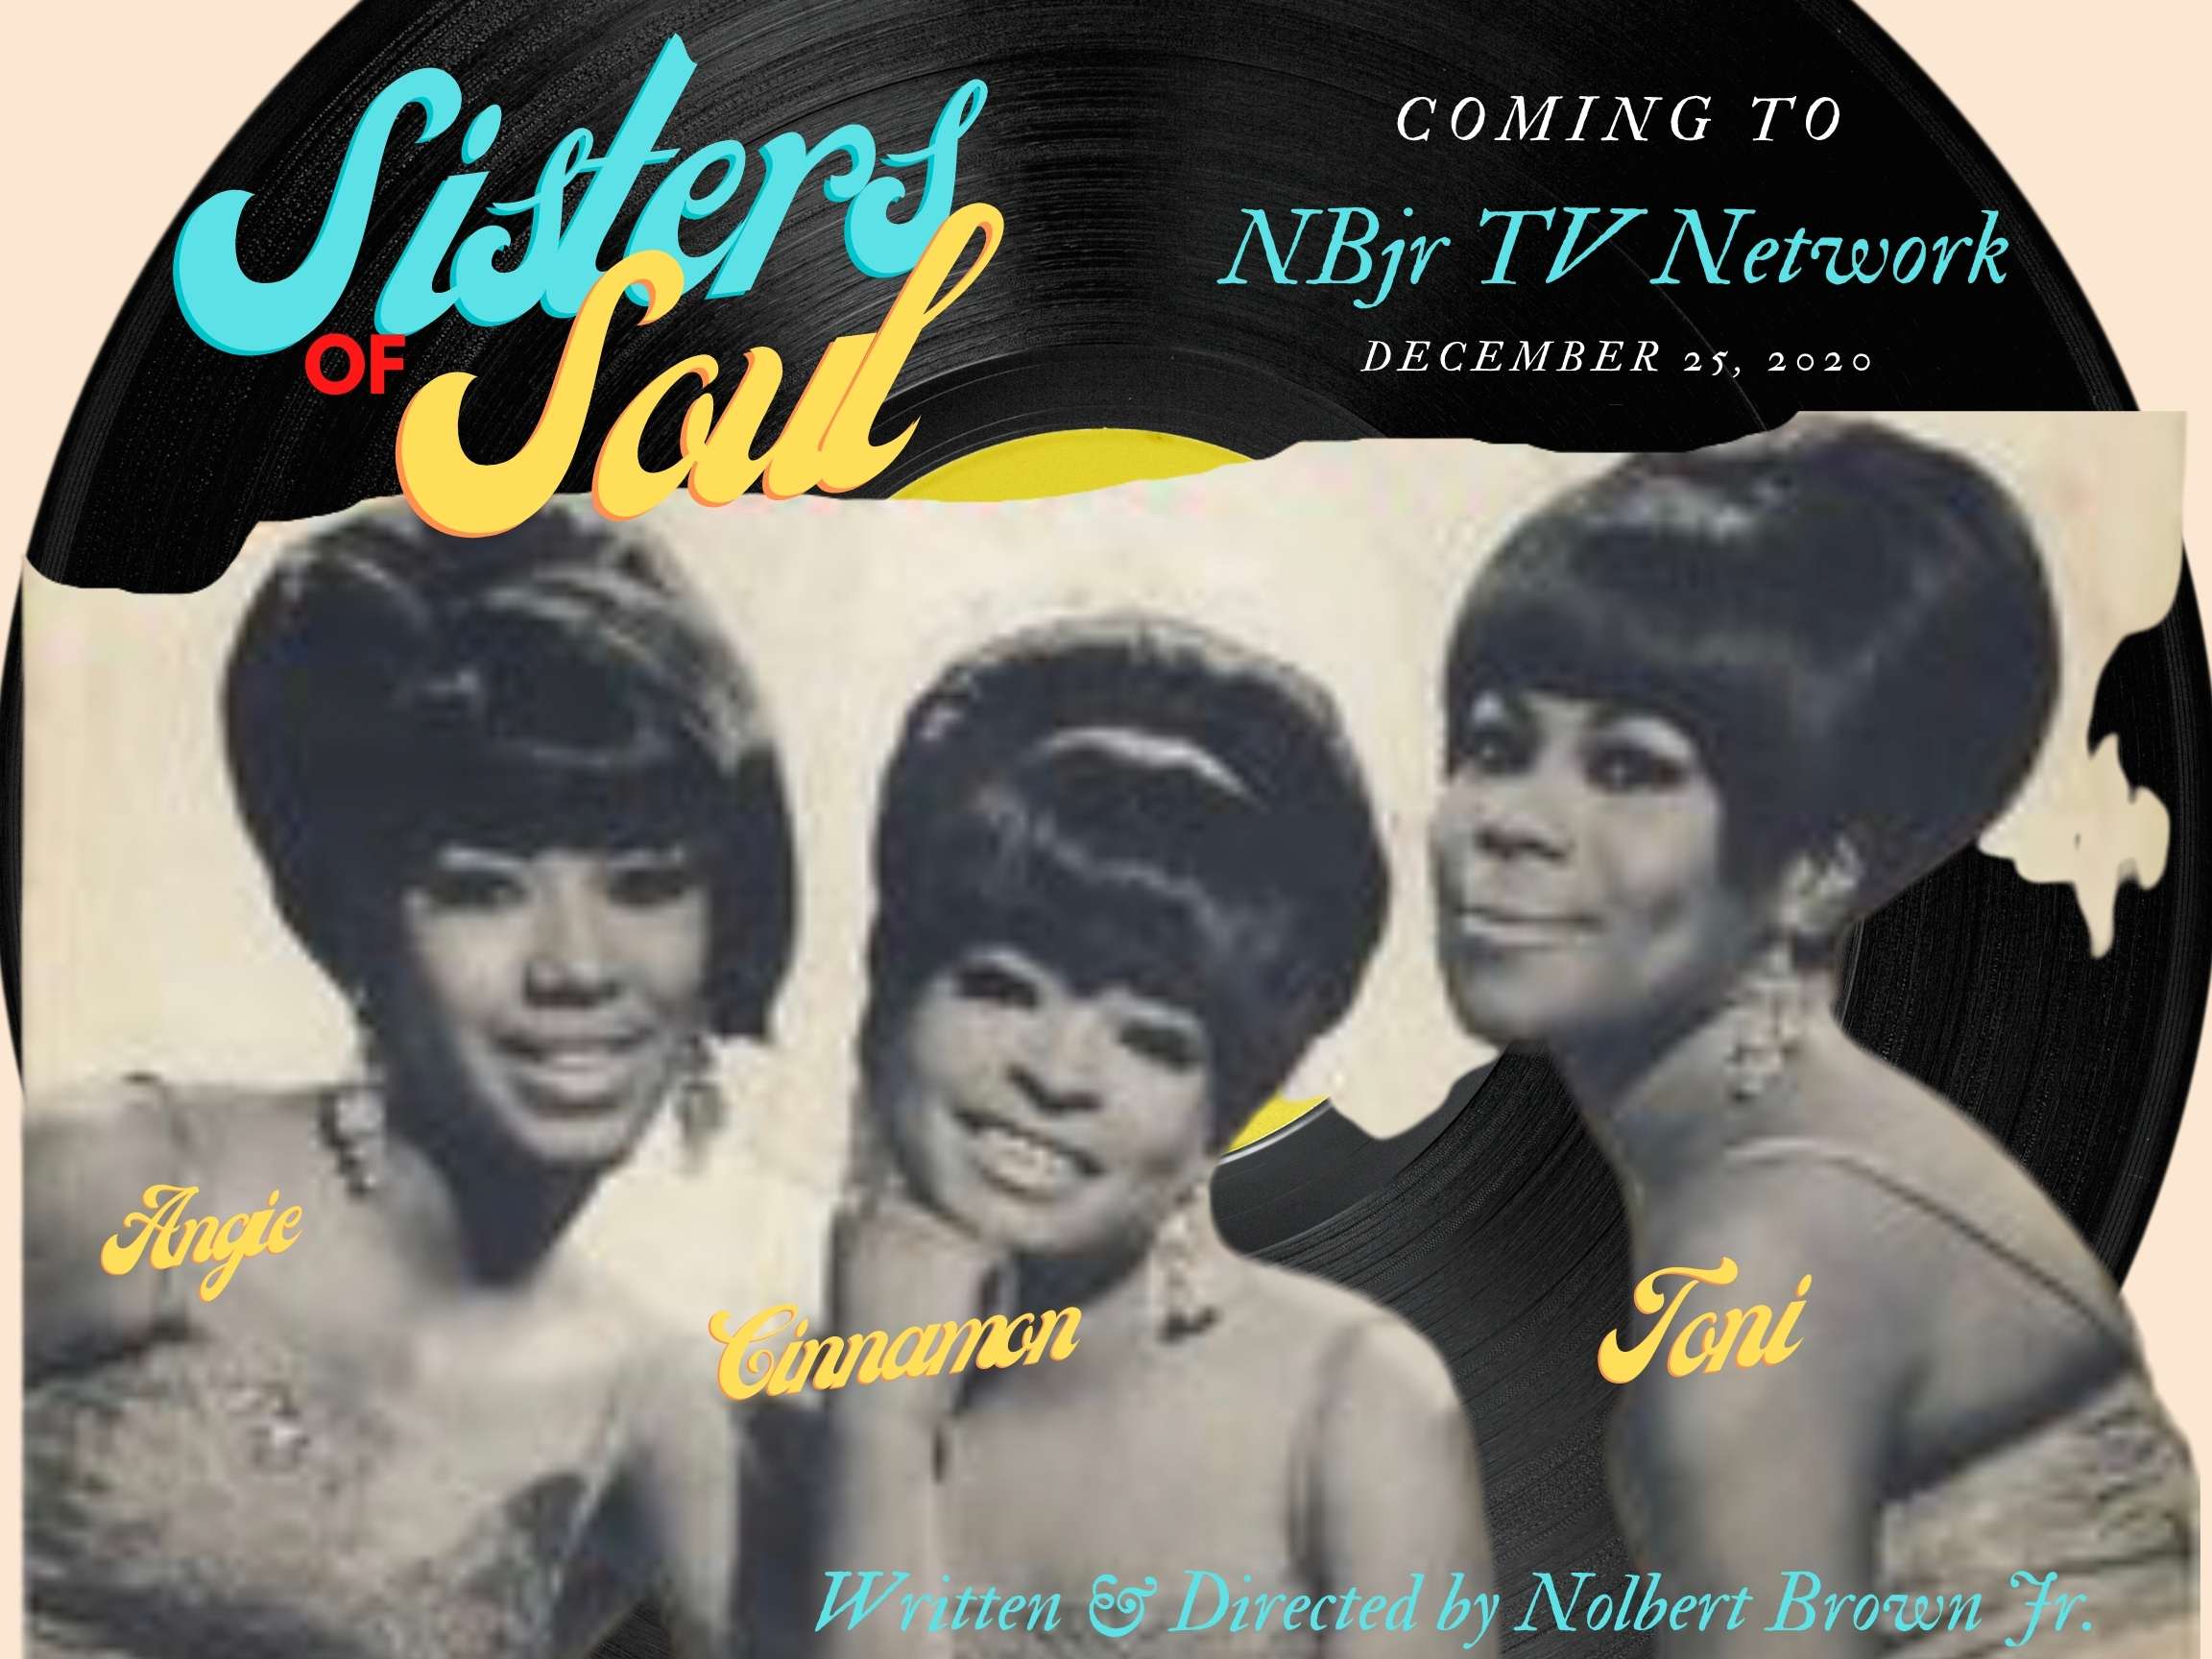 New Movie! Sisters of Soul! Coming Soon! To NBJr TV. Network!